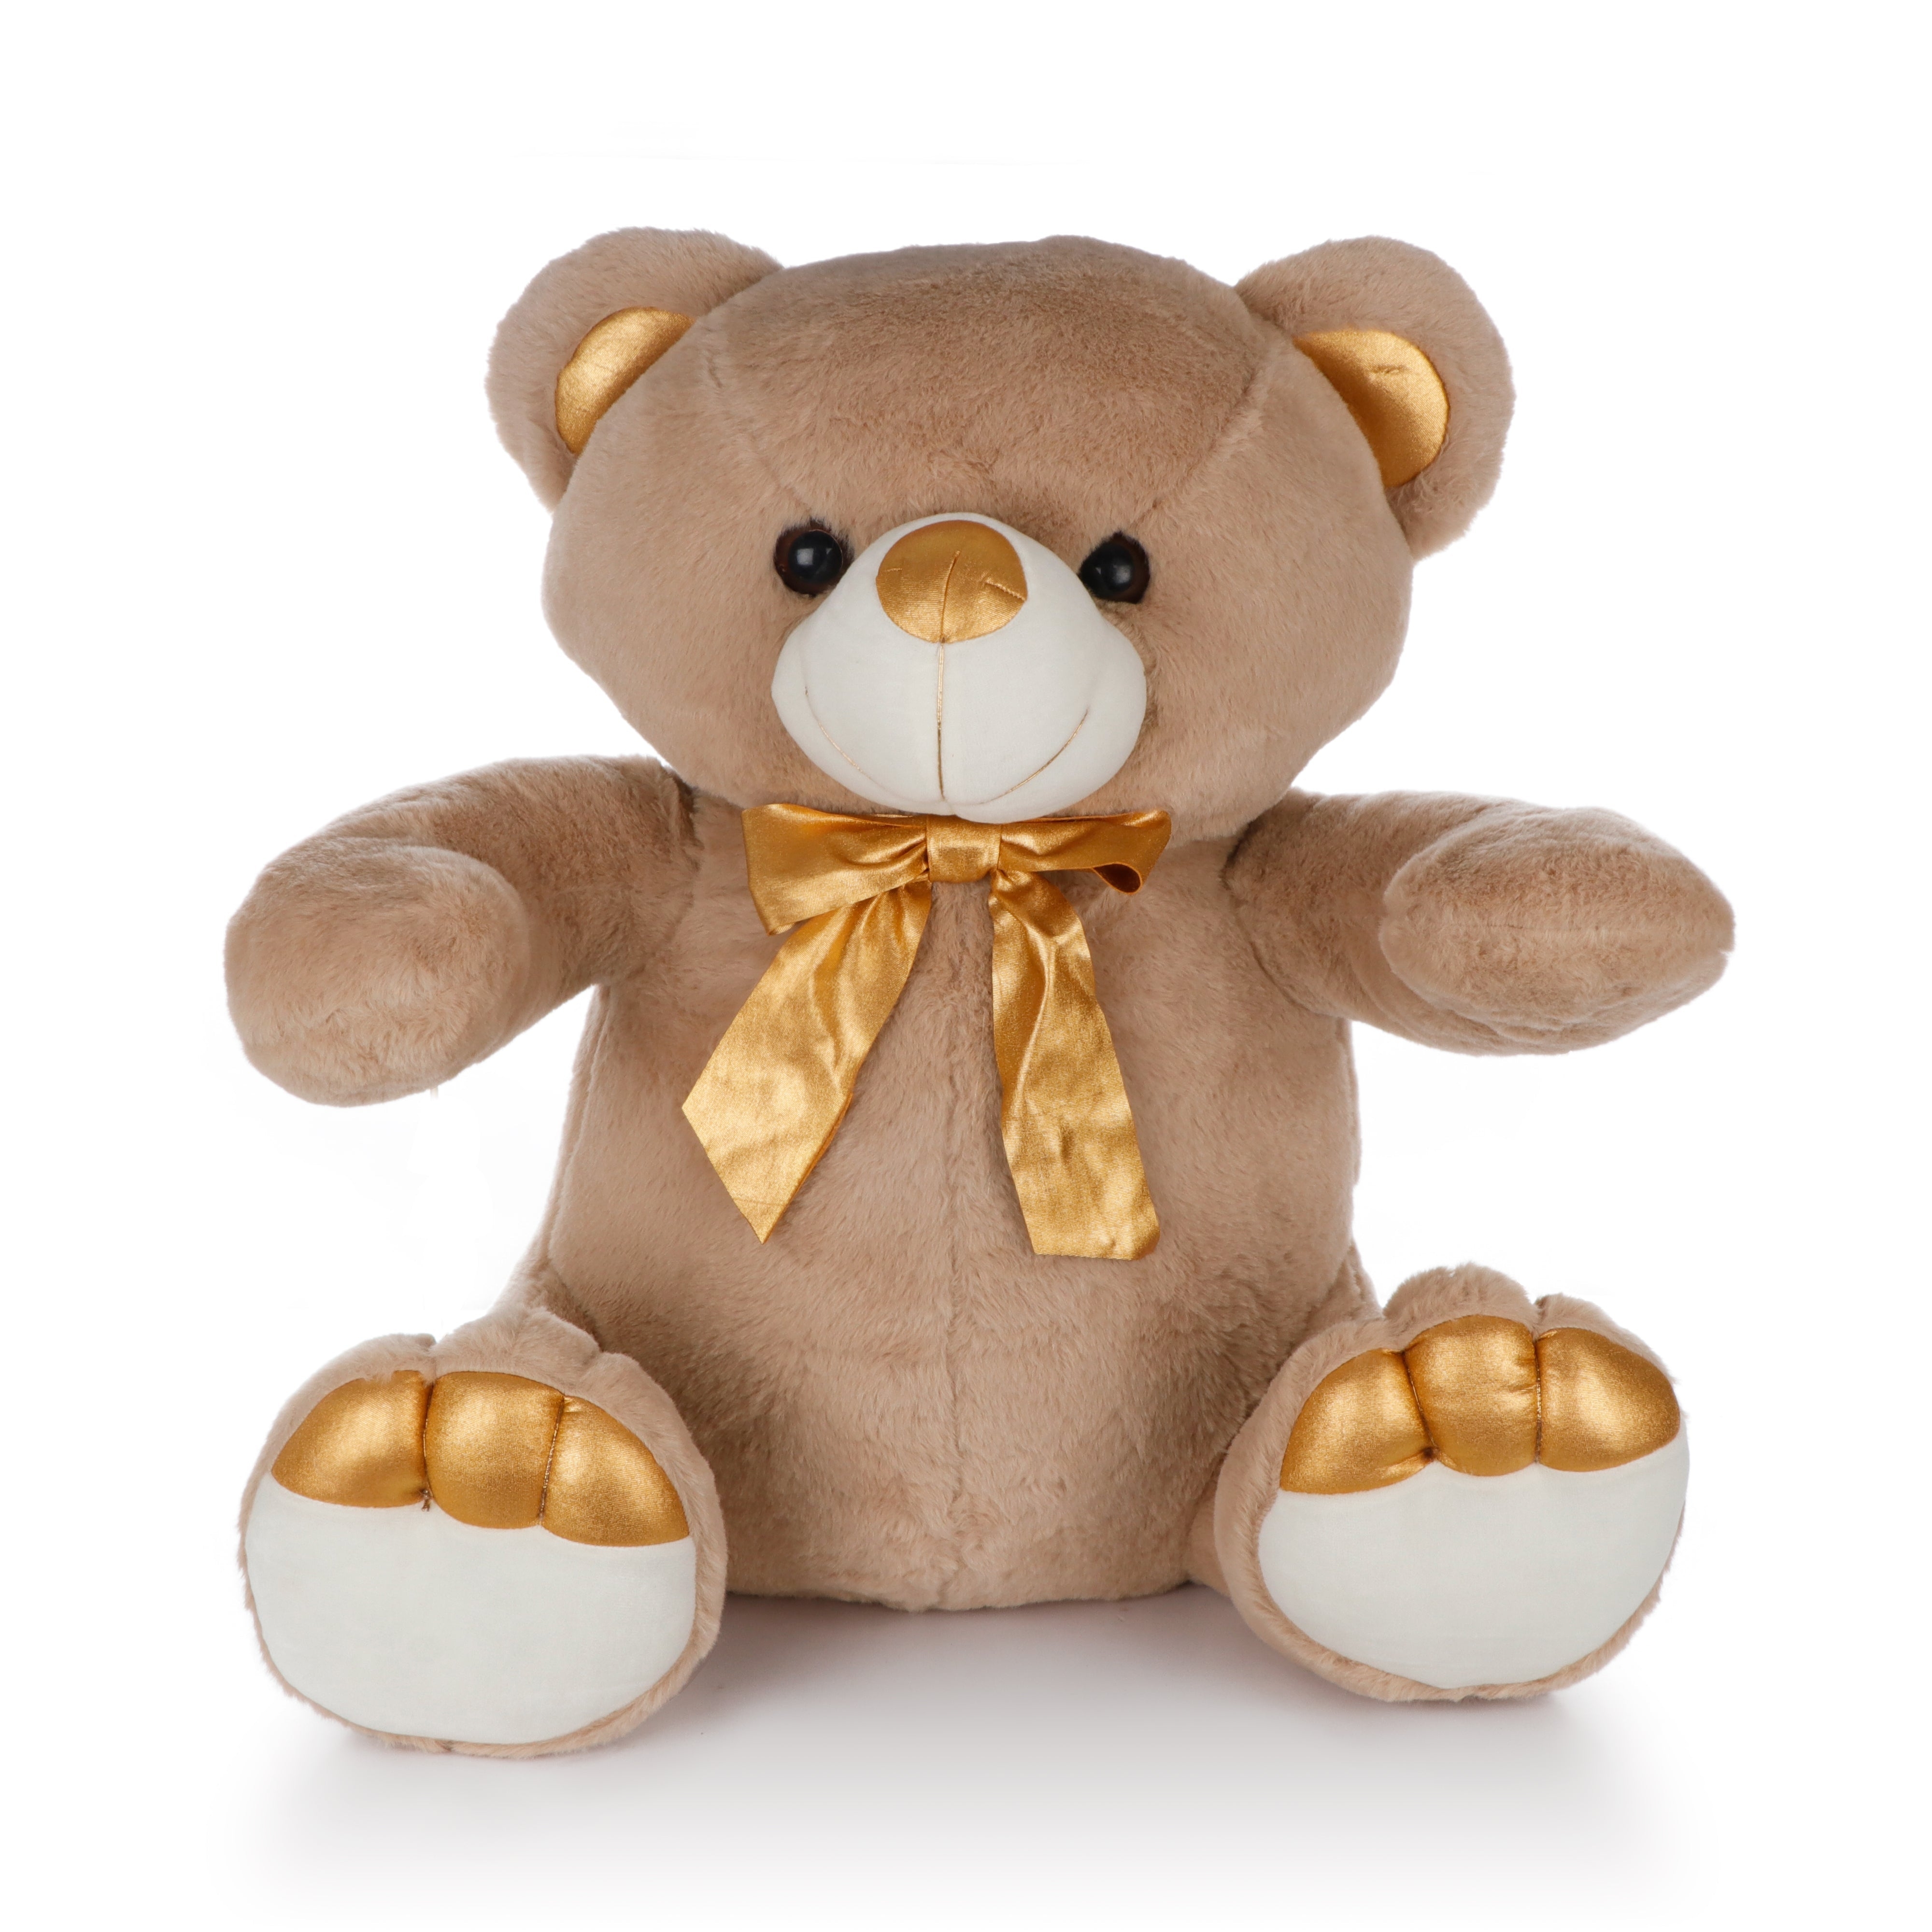 ARCHIES CUTE LOVABLE TEDDY BEAR PLUSH SOFT TOY WITH HEART SHAPE BALLOON GIFT  FOR SOMEONE SPECIAL – 23CM - eGalore.in